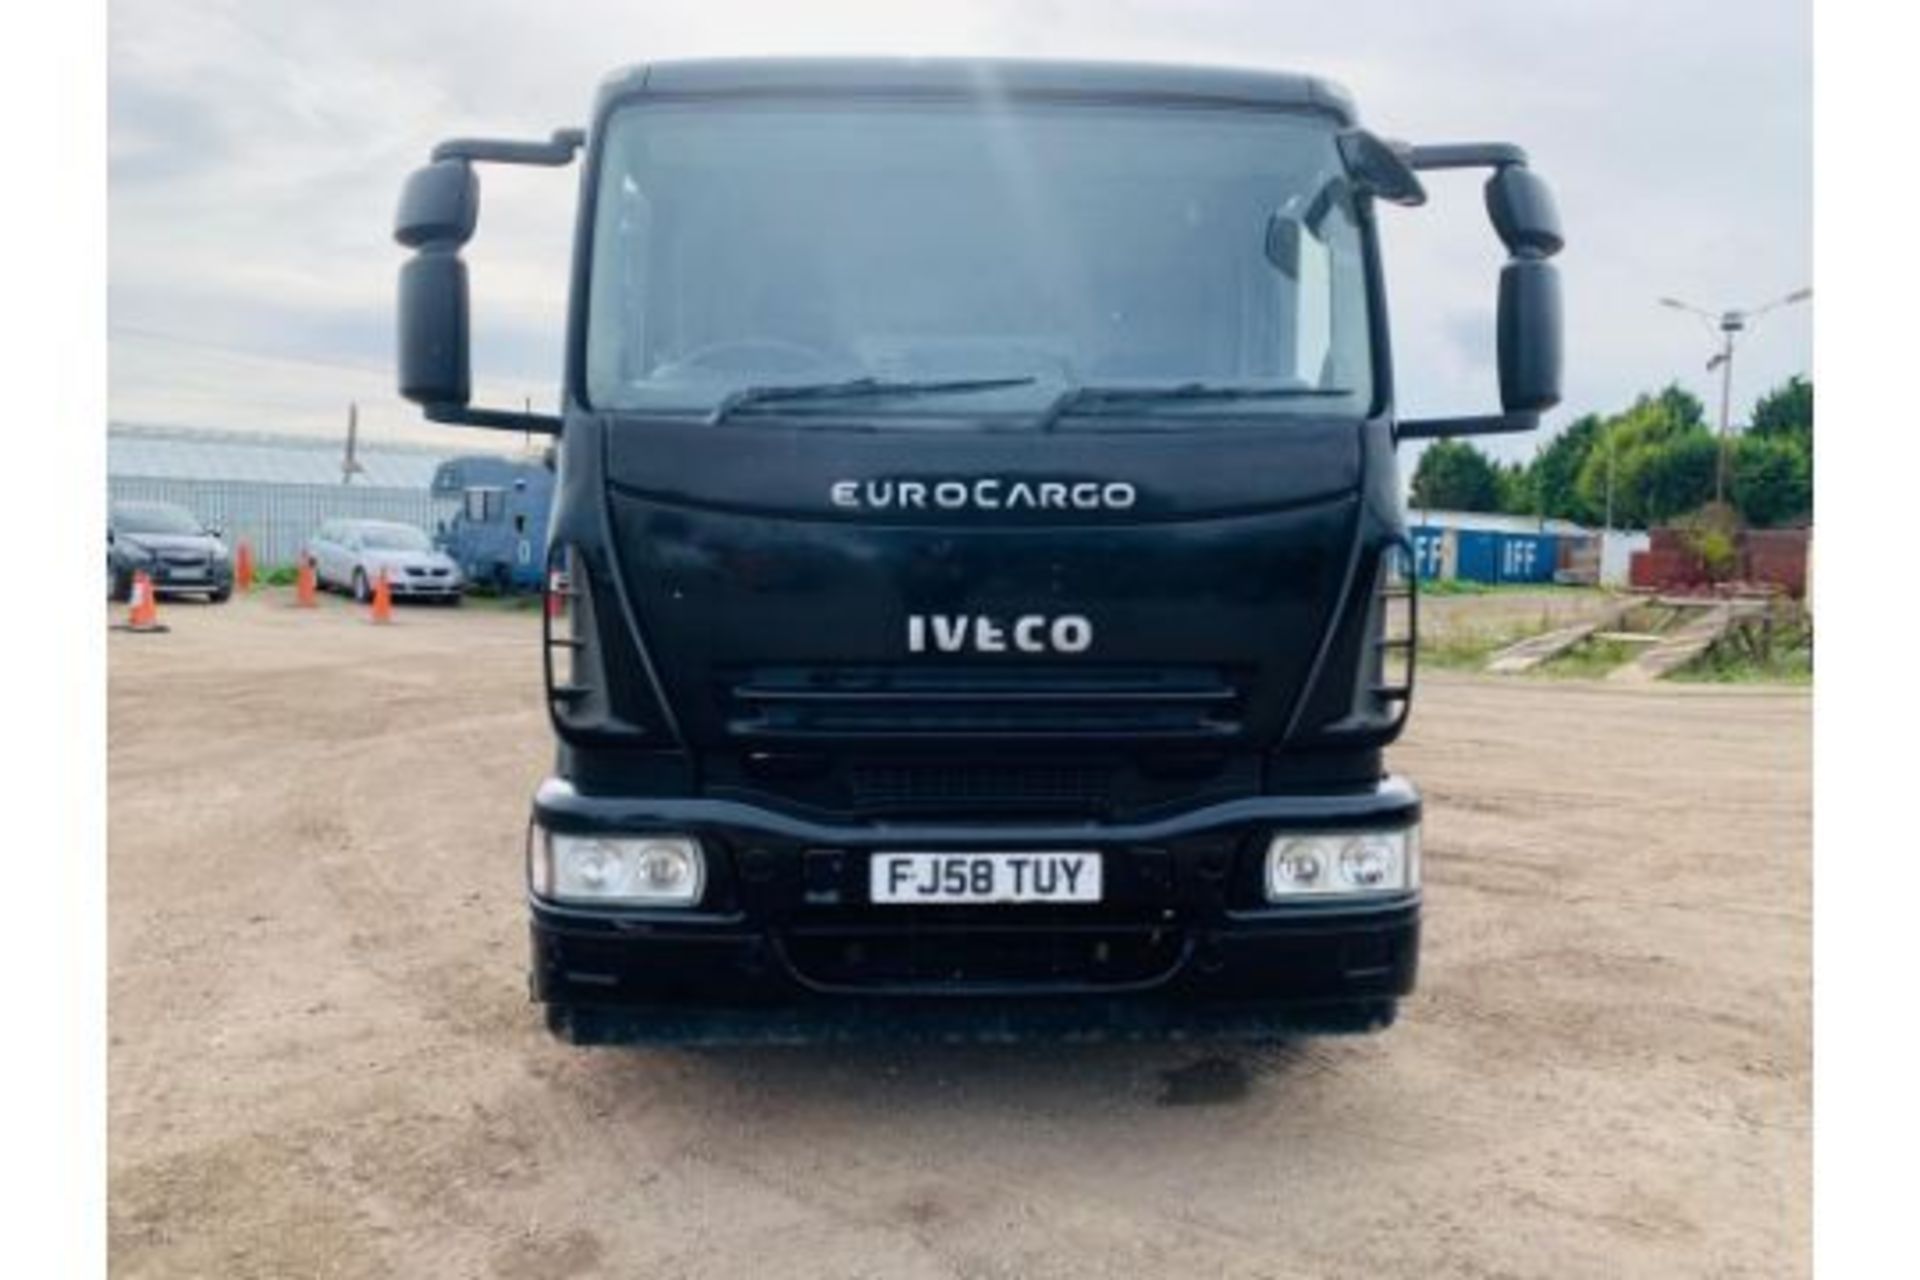 Iveco Eurocargo 180E25 - 2009 Year - 18 Tonne - 4x2 - Day Cab Truck - Image 5 of 11